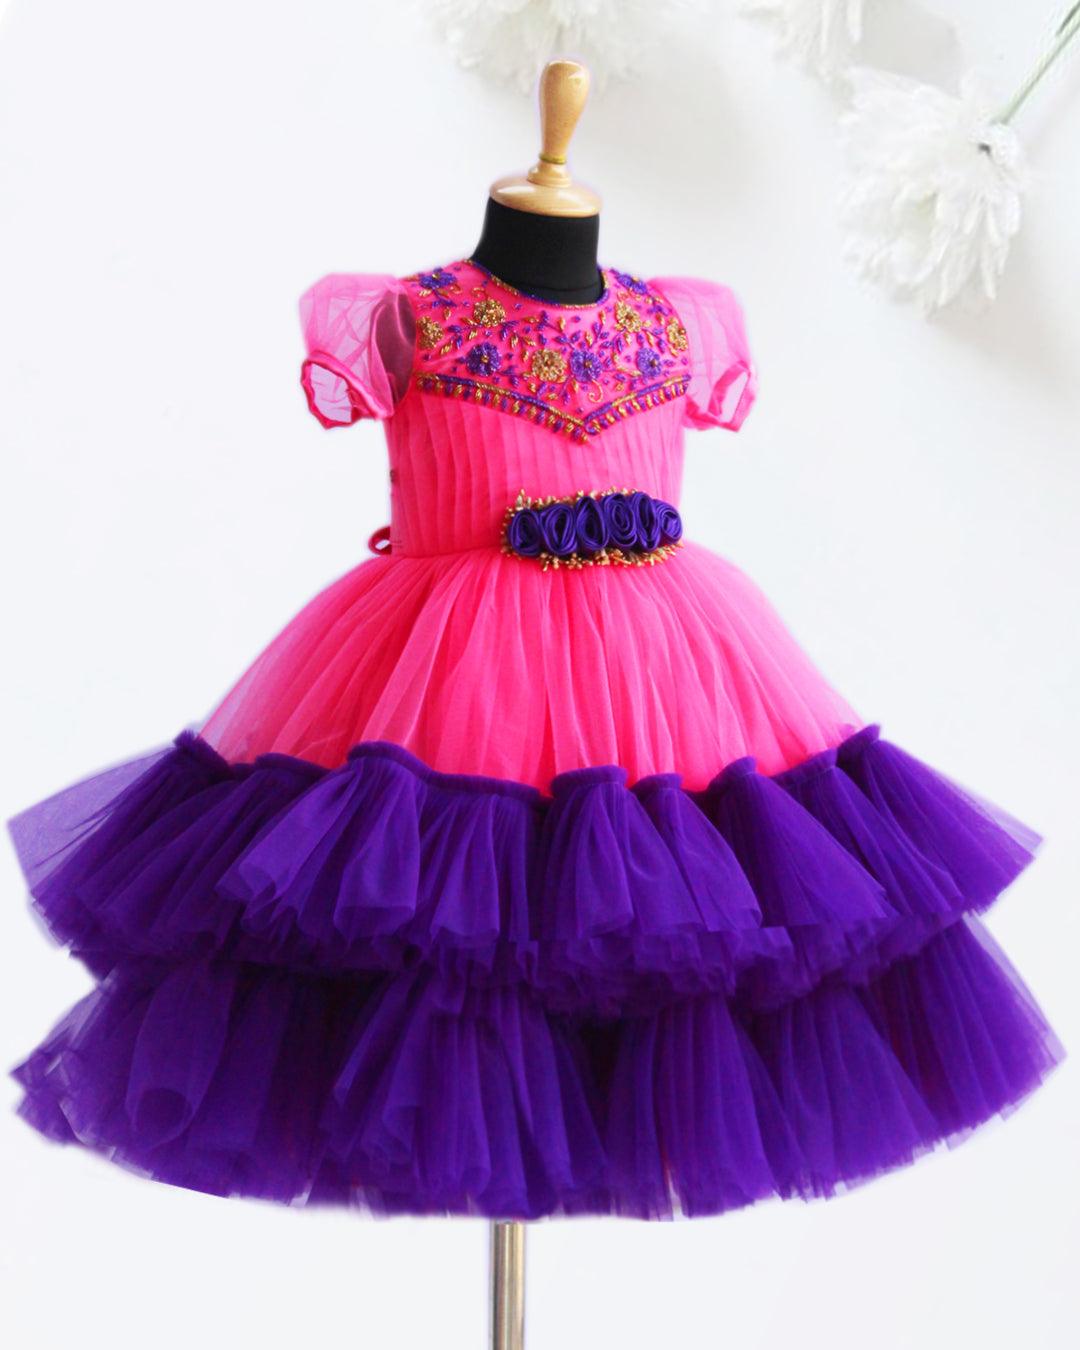 Peach & Violet combo Handwork Ruffles Party wear Frock
Material: Peach colour nylon net material is used as pleated design in the yoke portion with Heavy quality ultra satin as the primary lining .This satin lining give